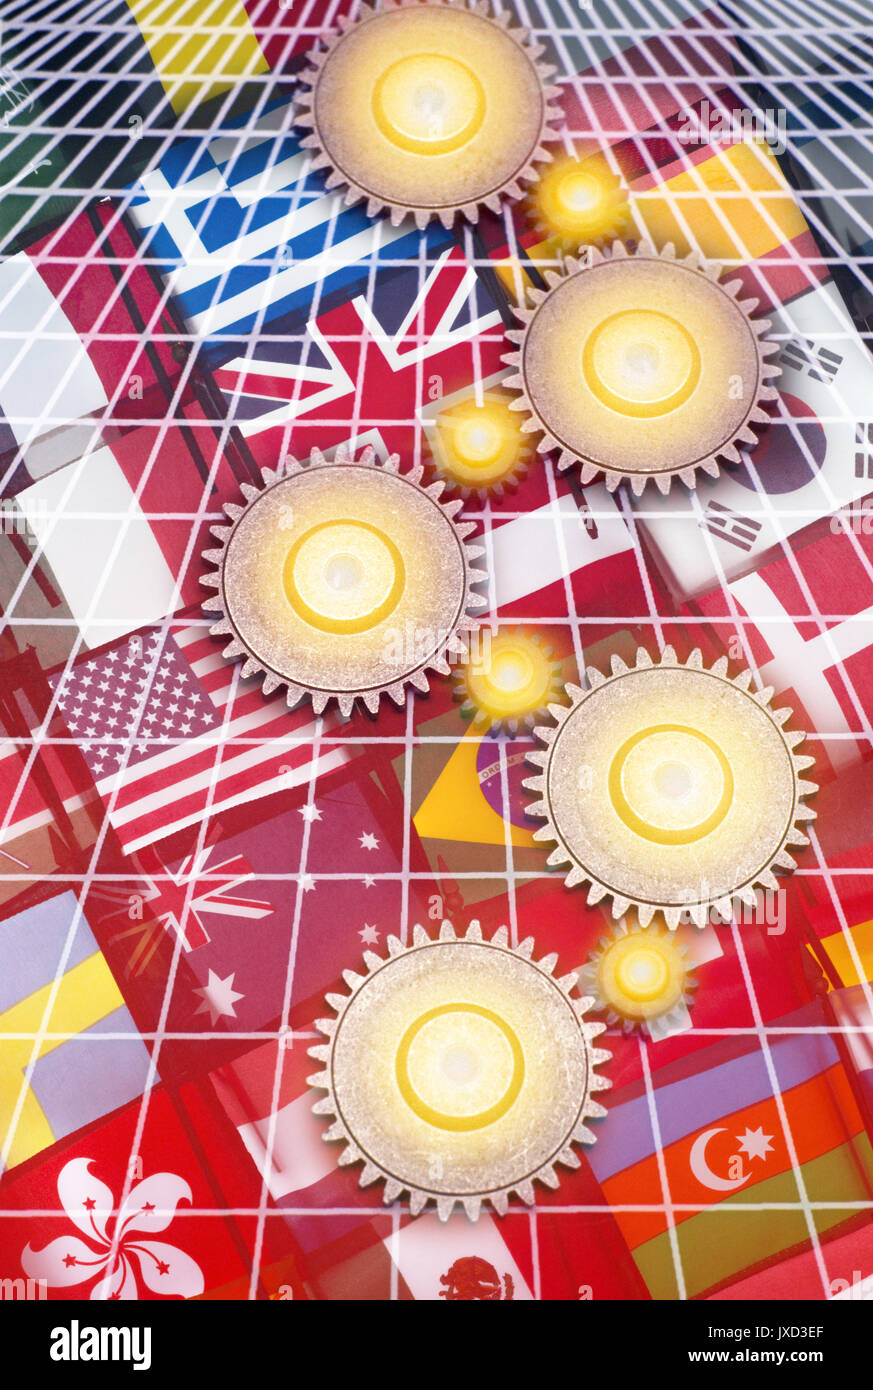 INTERLOCKING COG GEARS ON GRID OVER NATIONAL FLAGS OF MANY NATIONS Stock Photo